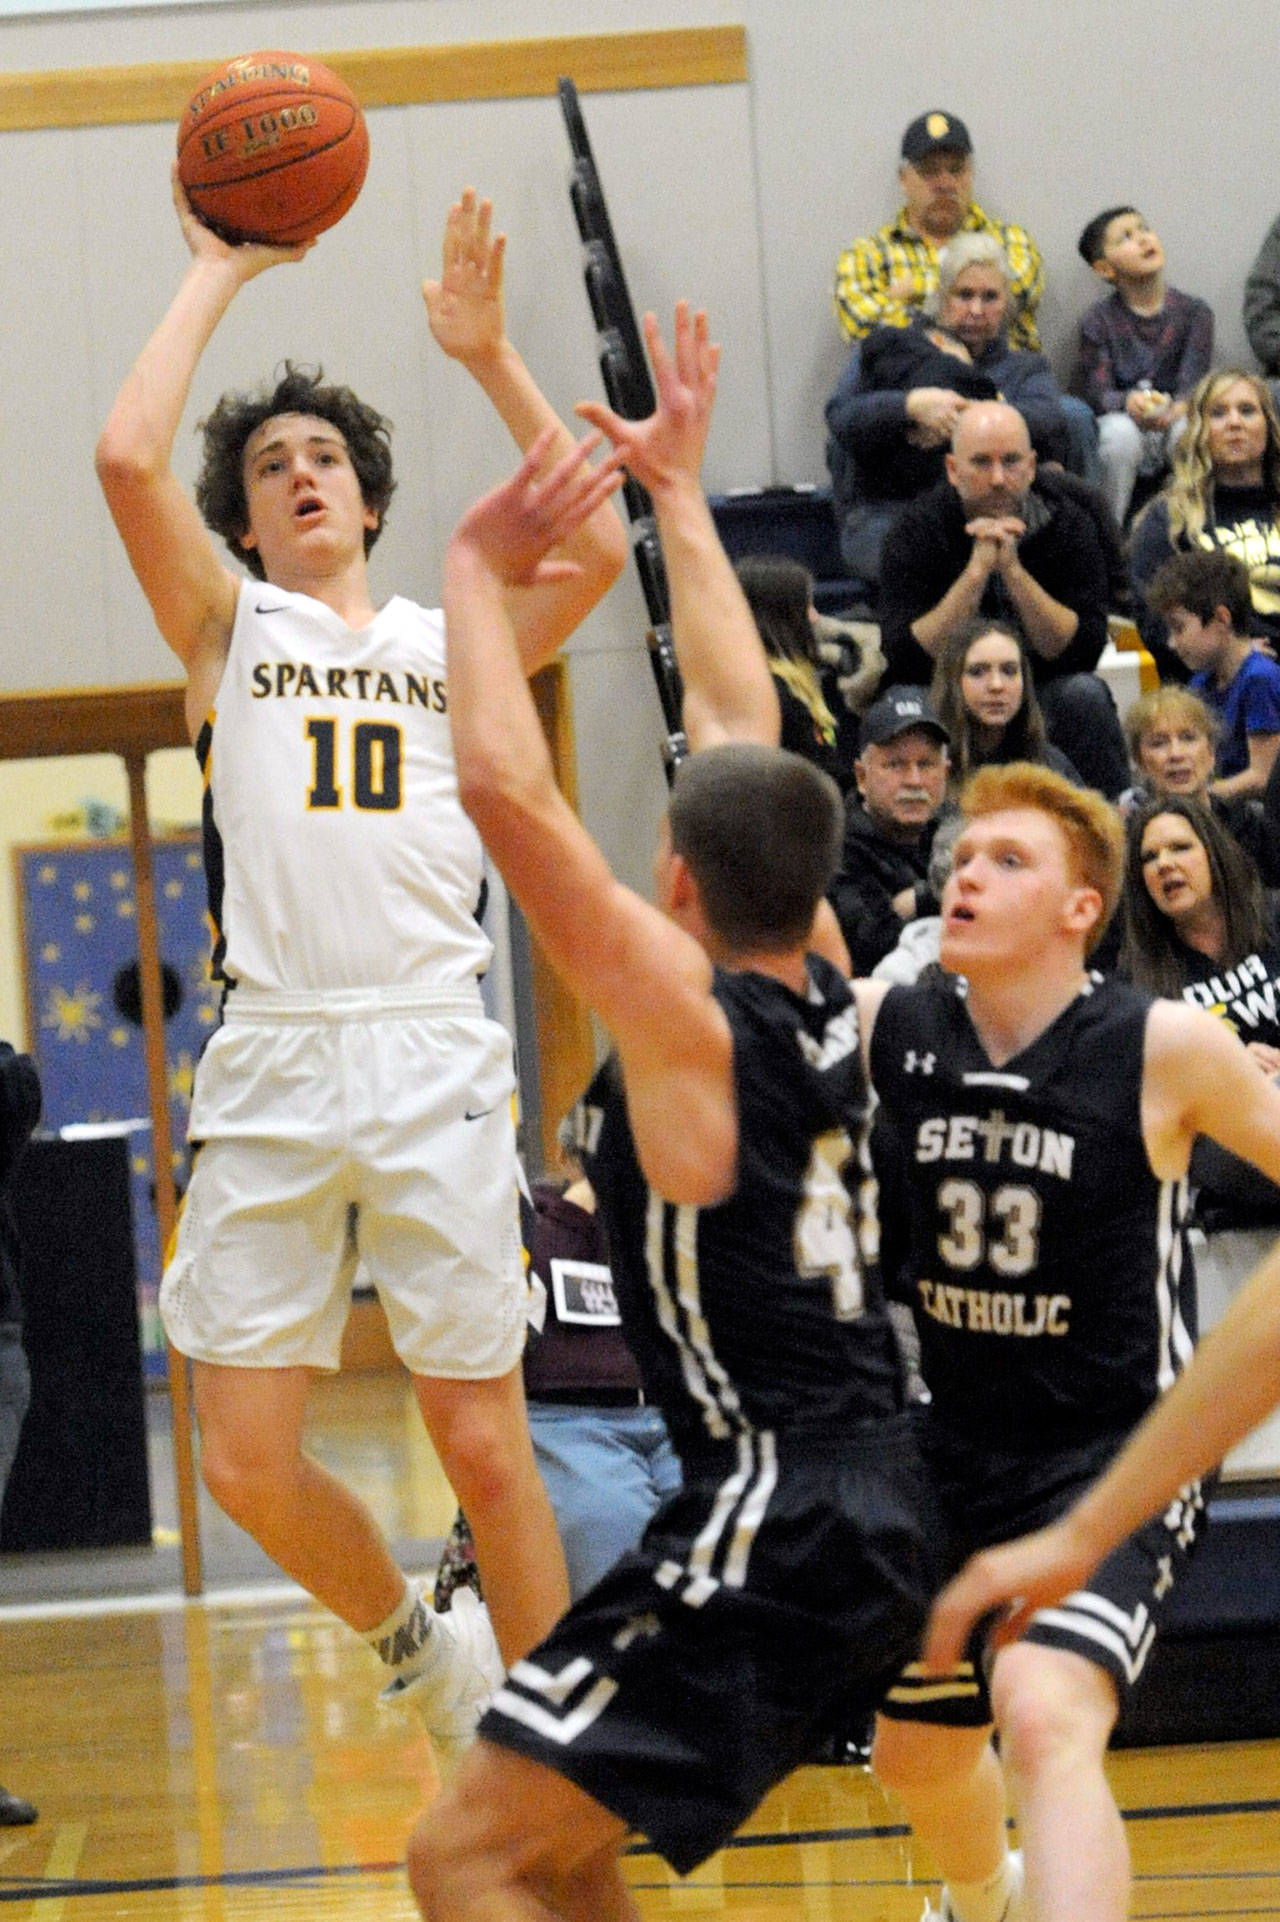 Spartan Carter Windle (10) puts up a shot against Seton Catholic’s Griffin Young and Andrew Olson (33) Friday evening in Forks where the Cougars defeated Forks 66 to 38 in the 1A Southwest District Tournament. Lonnie.